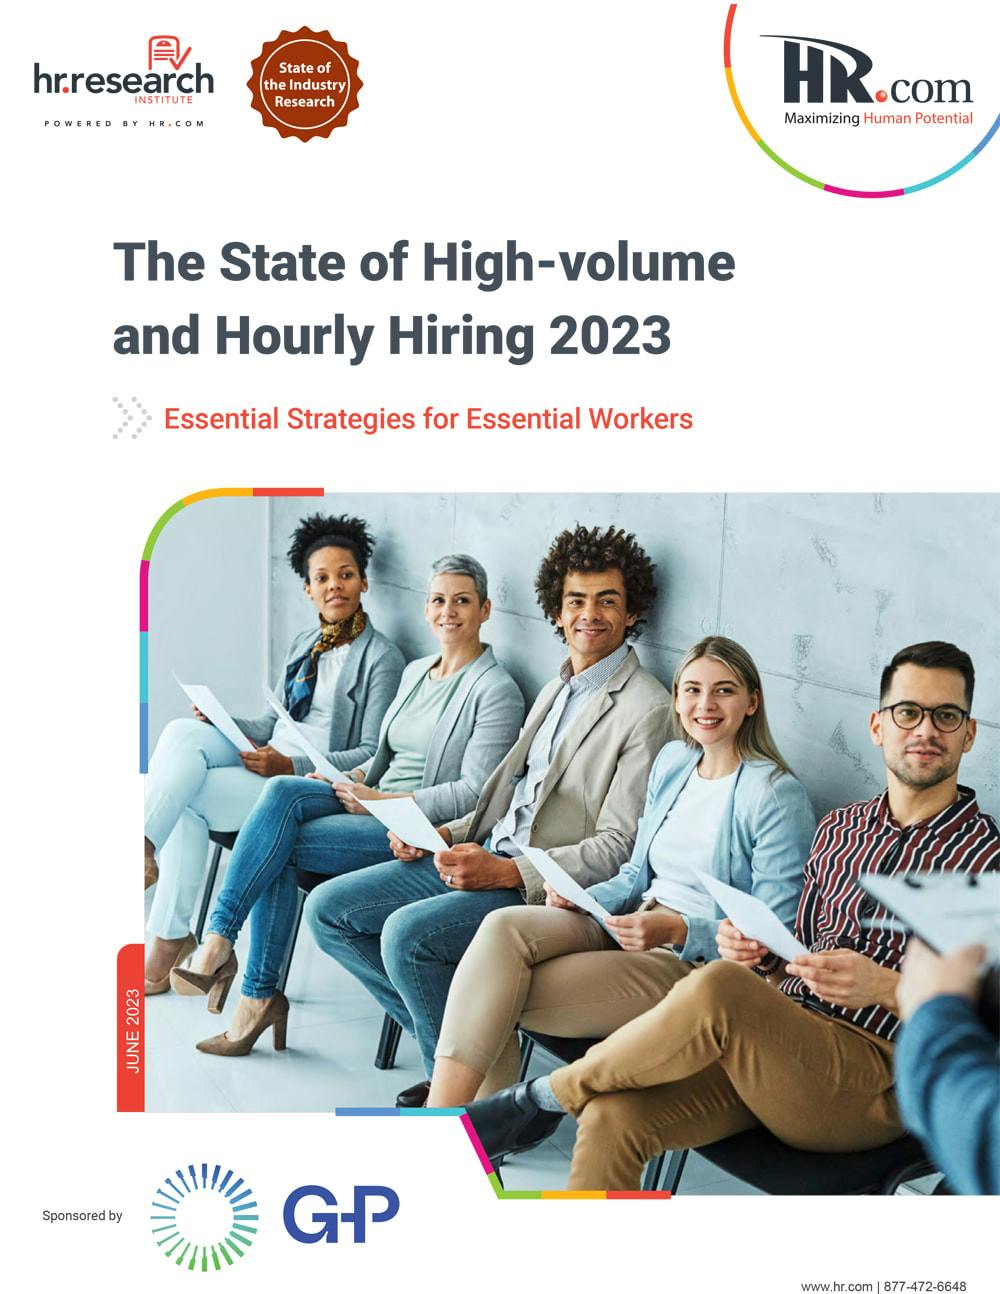 high-volume-and-hourly-hiring-2023-report-cover.jpg